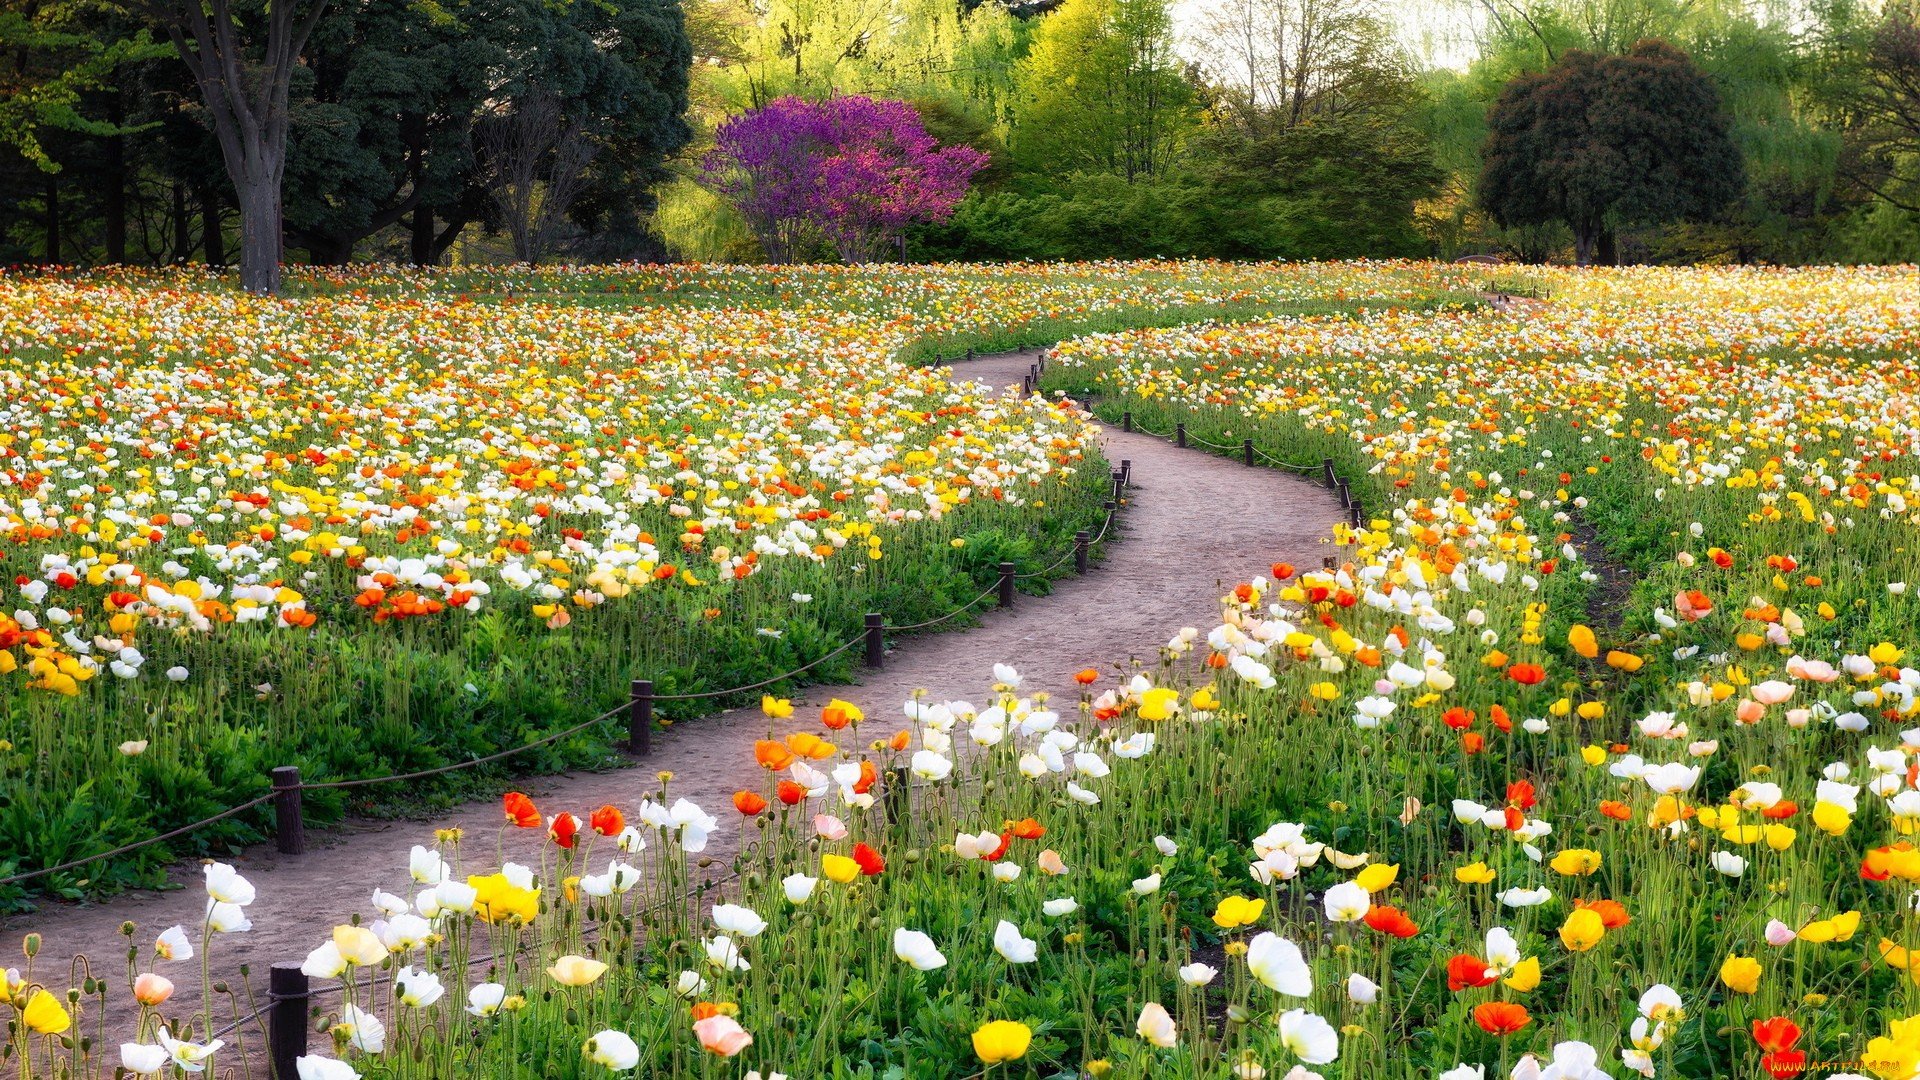 Dn/31, The Road To The Garden, - Flowers In The Road - HD Wallpaper 